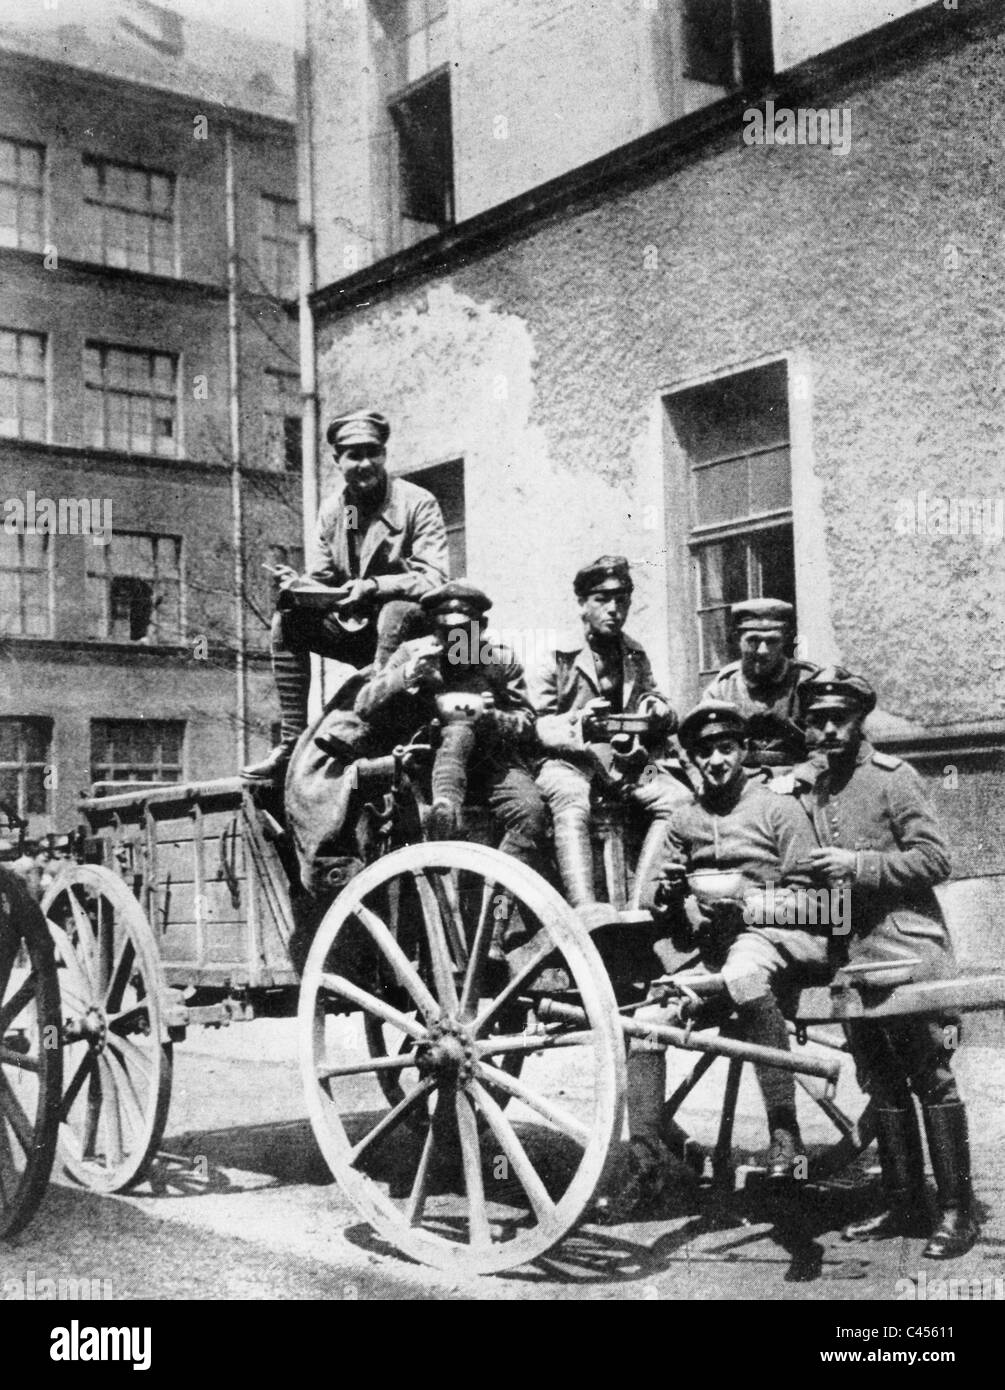 Soldiers of the Free Corps Epp in Munich, including Rudolf Hess, 1919 Stock Photo